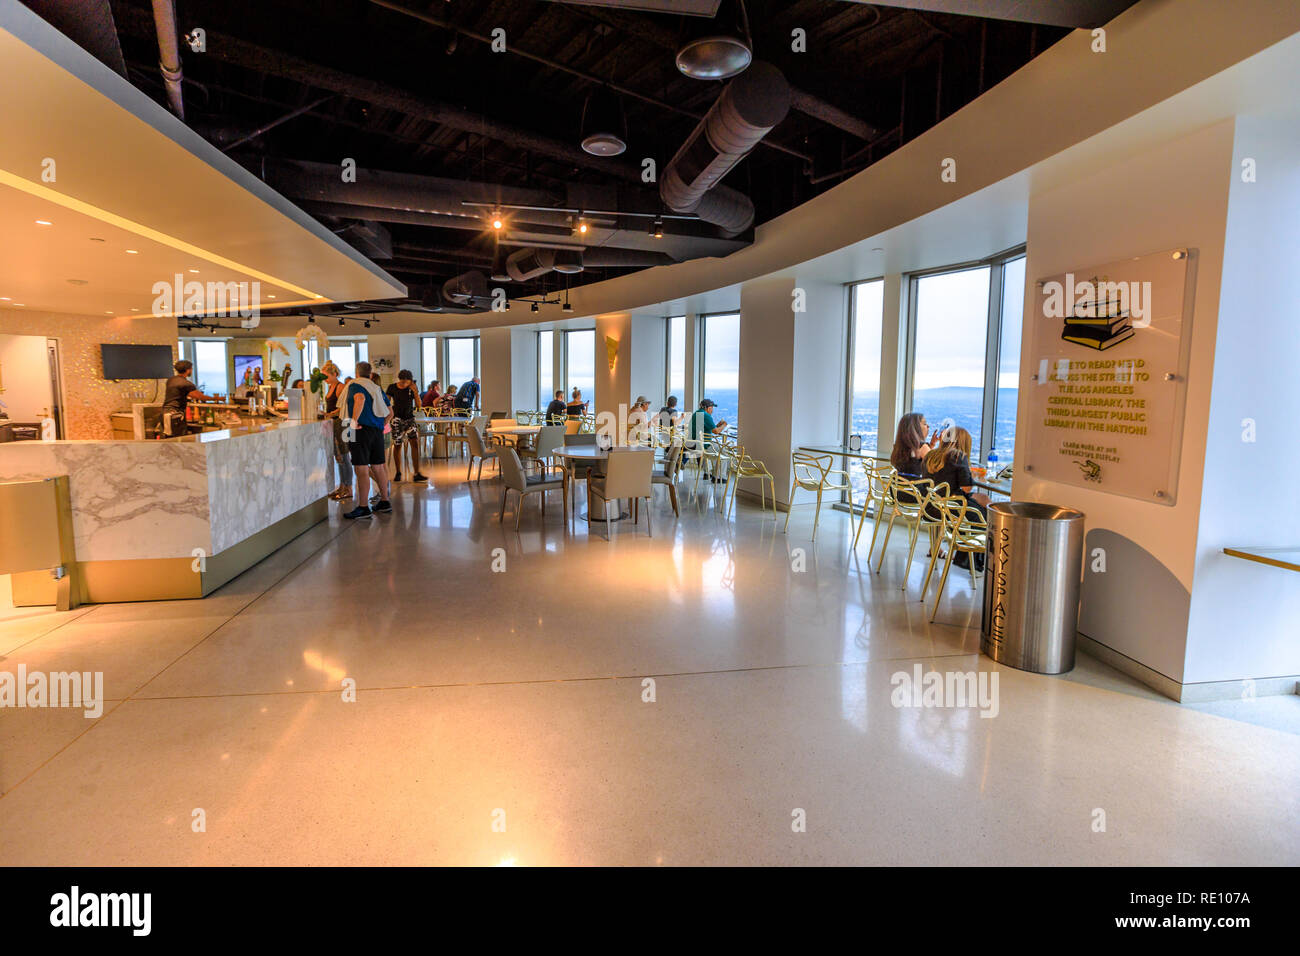 Los Angeles, California, United States - August 9, 2018: people inside Oue Skyspace U.S. Bank Tower with panoramic terrace over Downtown LA, Southern California on the 70th floor. Stock Photo